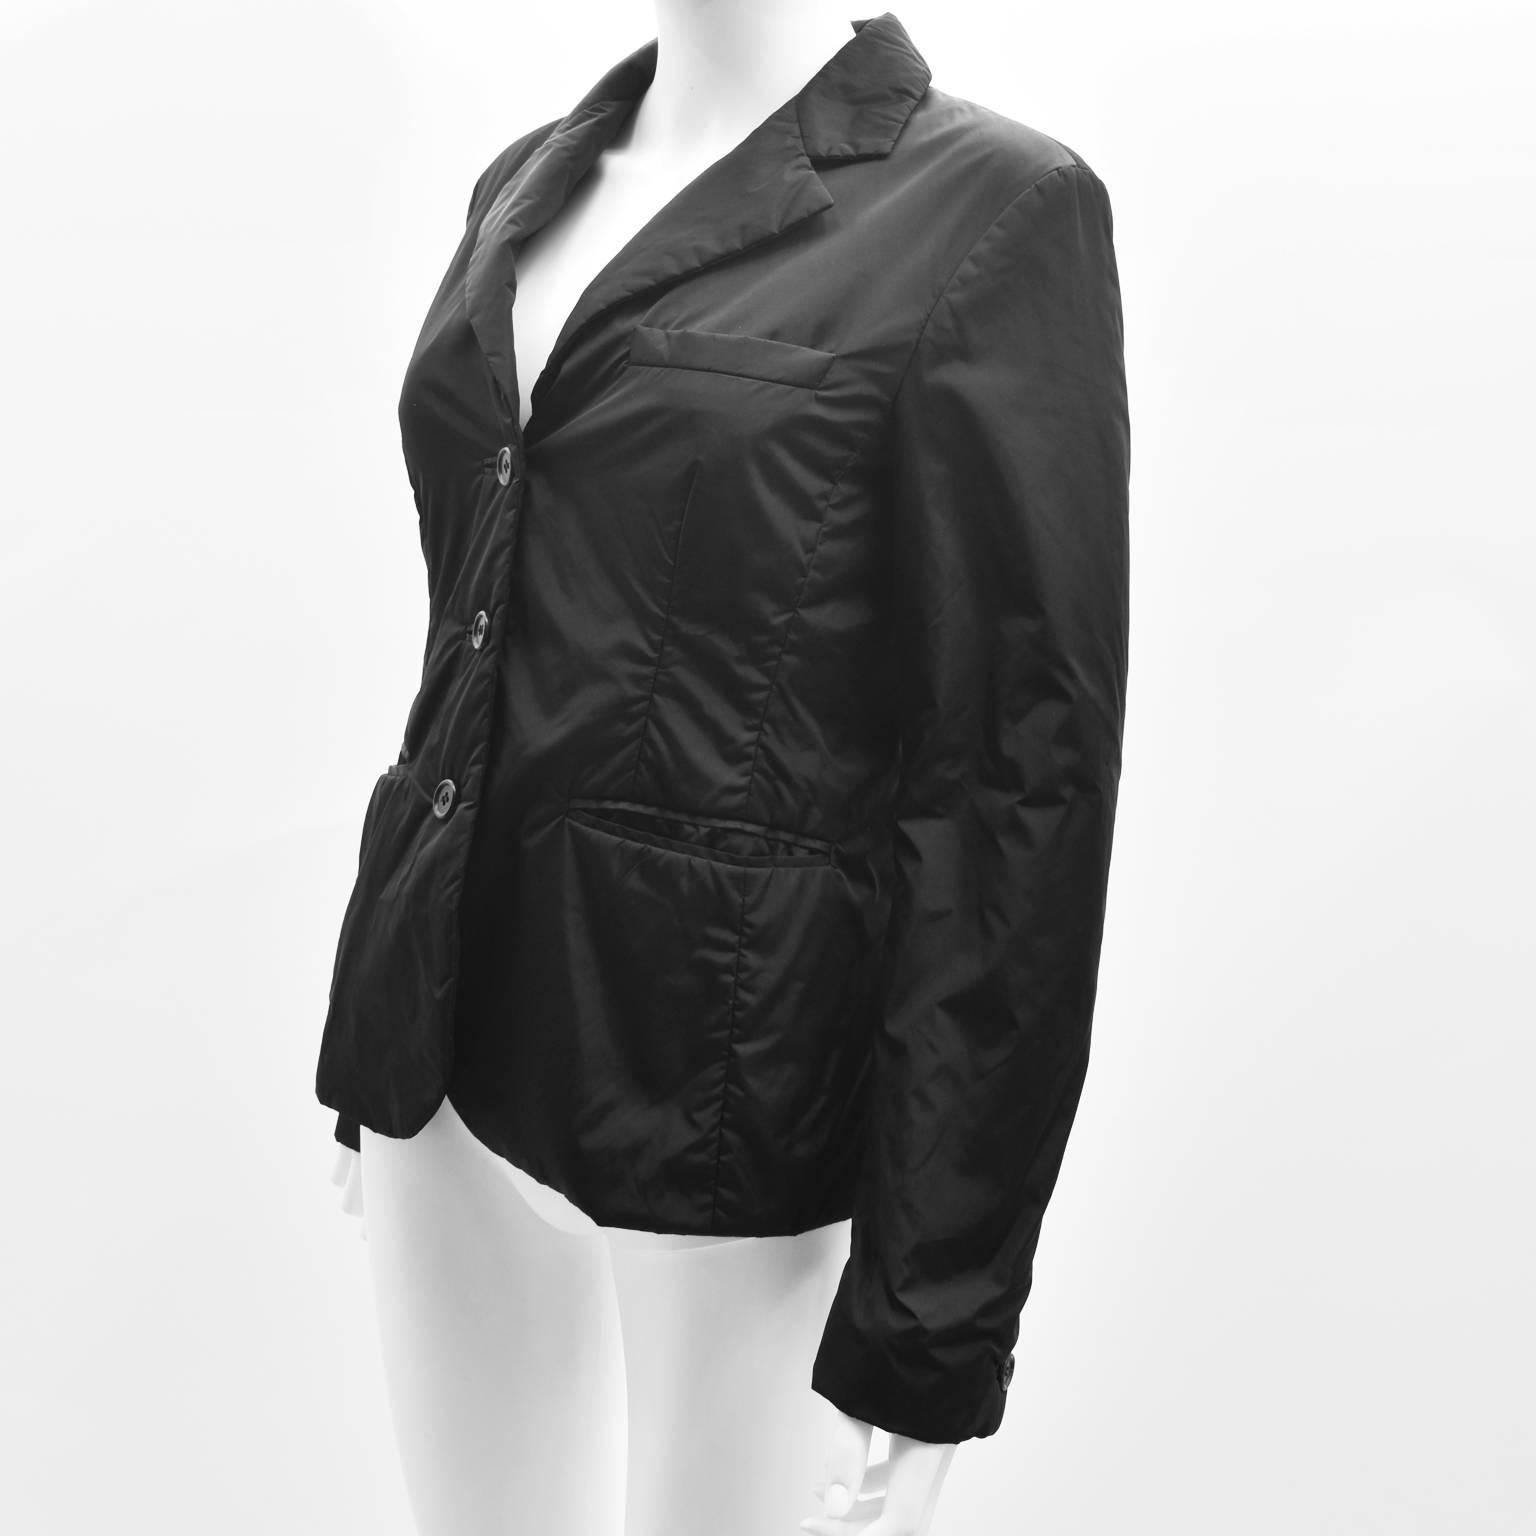 A sporty black nylon padded blazer from Prada’s sport collection. The blazer has a classic design, with cropped shape, collar and long sleeves but is given a sportswear twist with the padded tech/nylon fabric. The jacket is in excellent condition